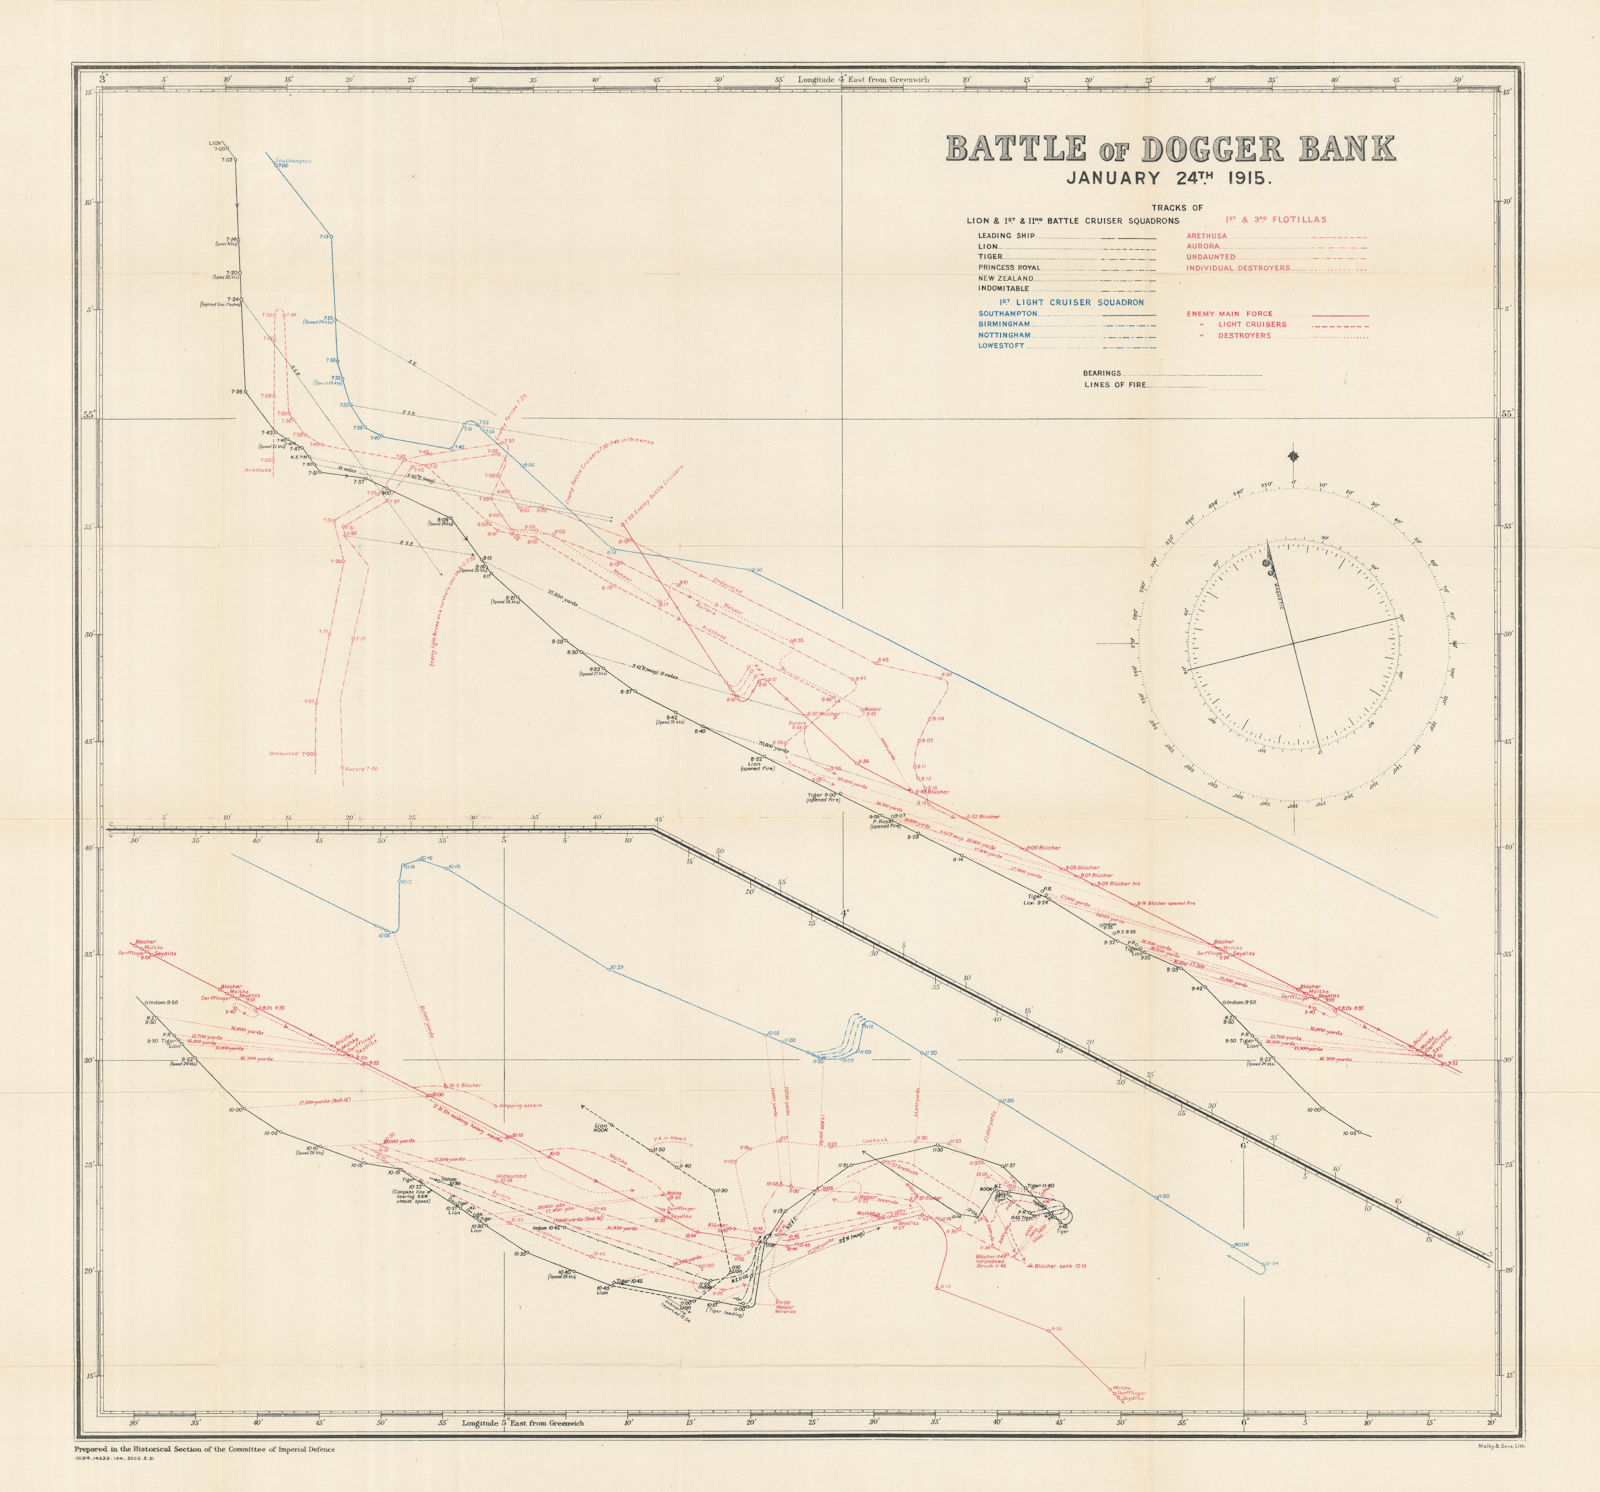 Battle of Dogger Bank, January 24th 1915. First World War. 1921 old map